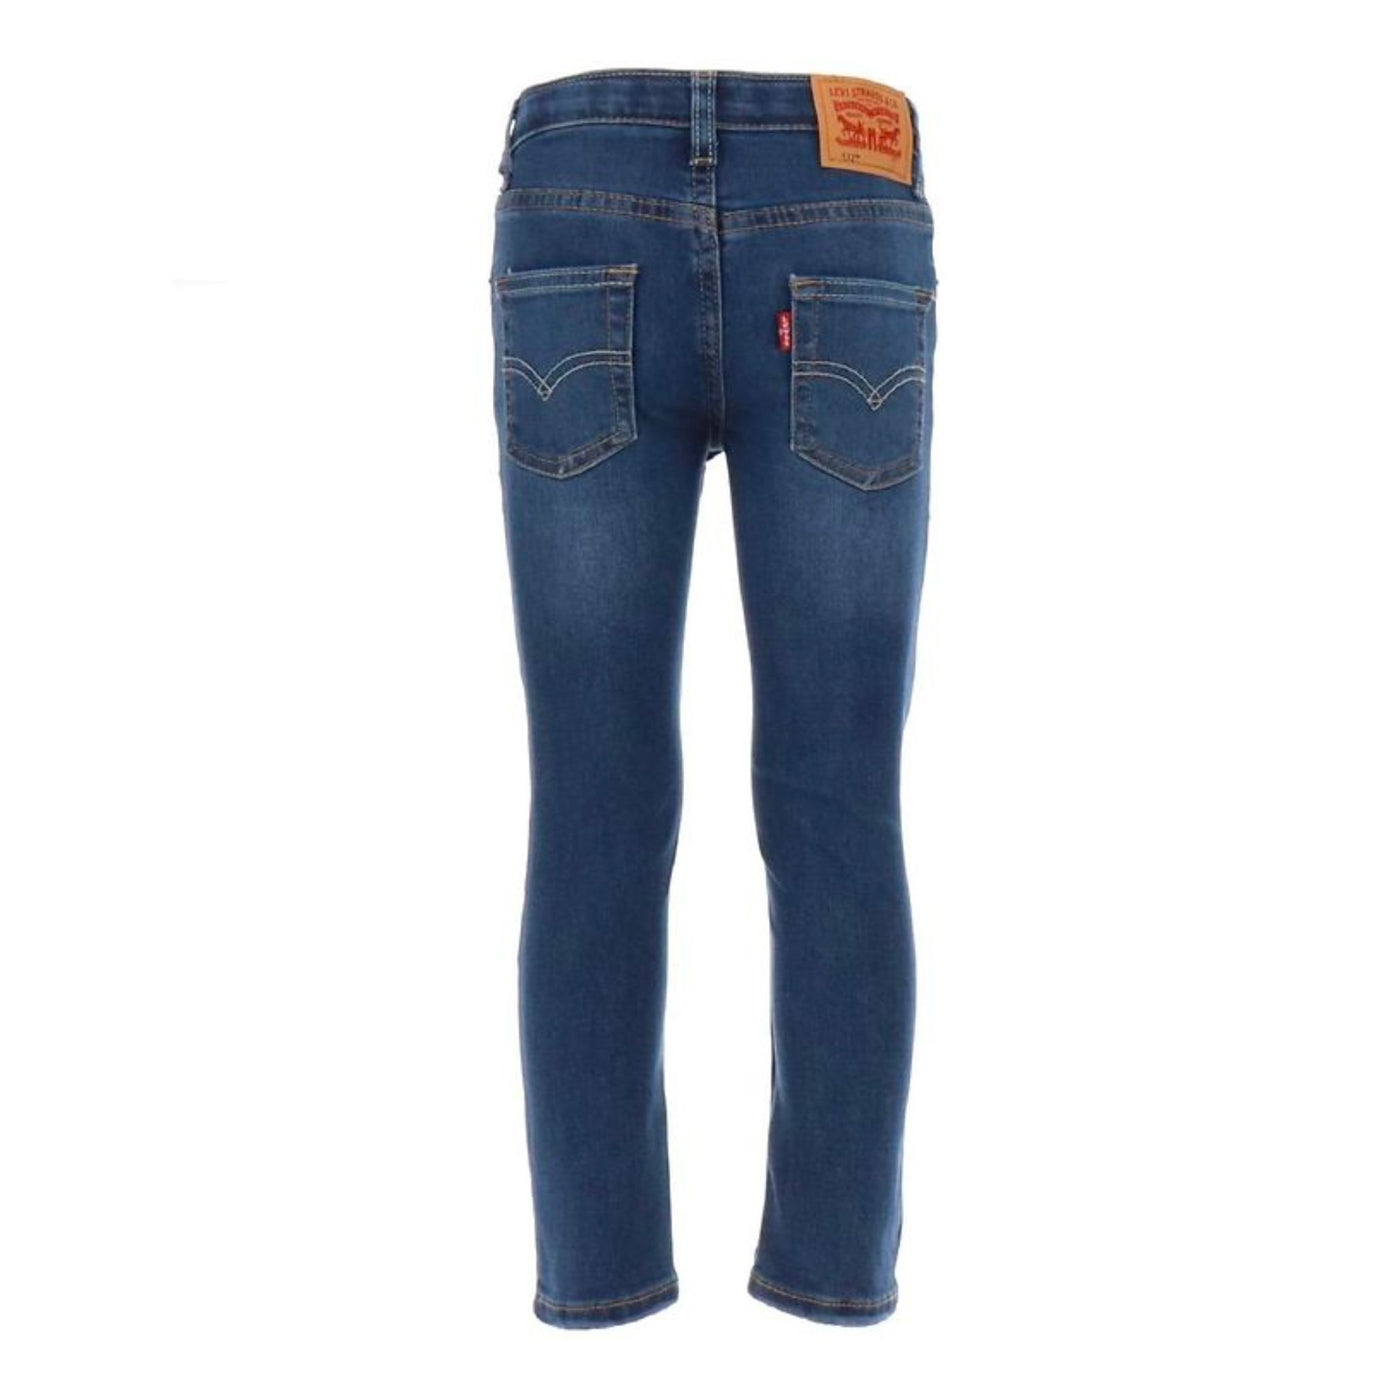 Boy's jeans 6-8 years Regular Fit